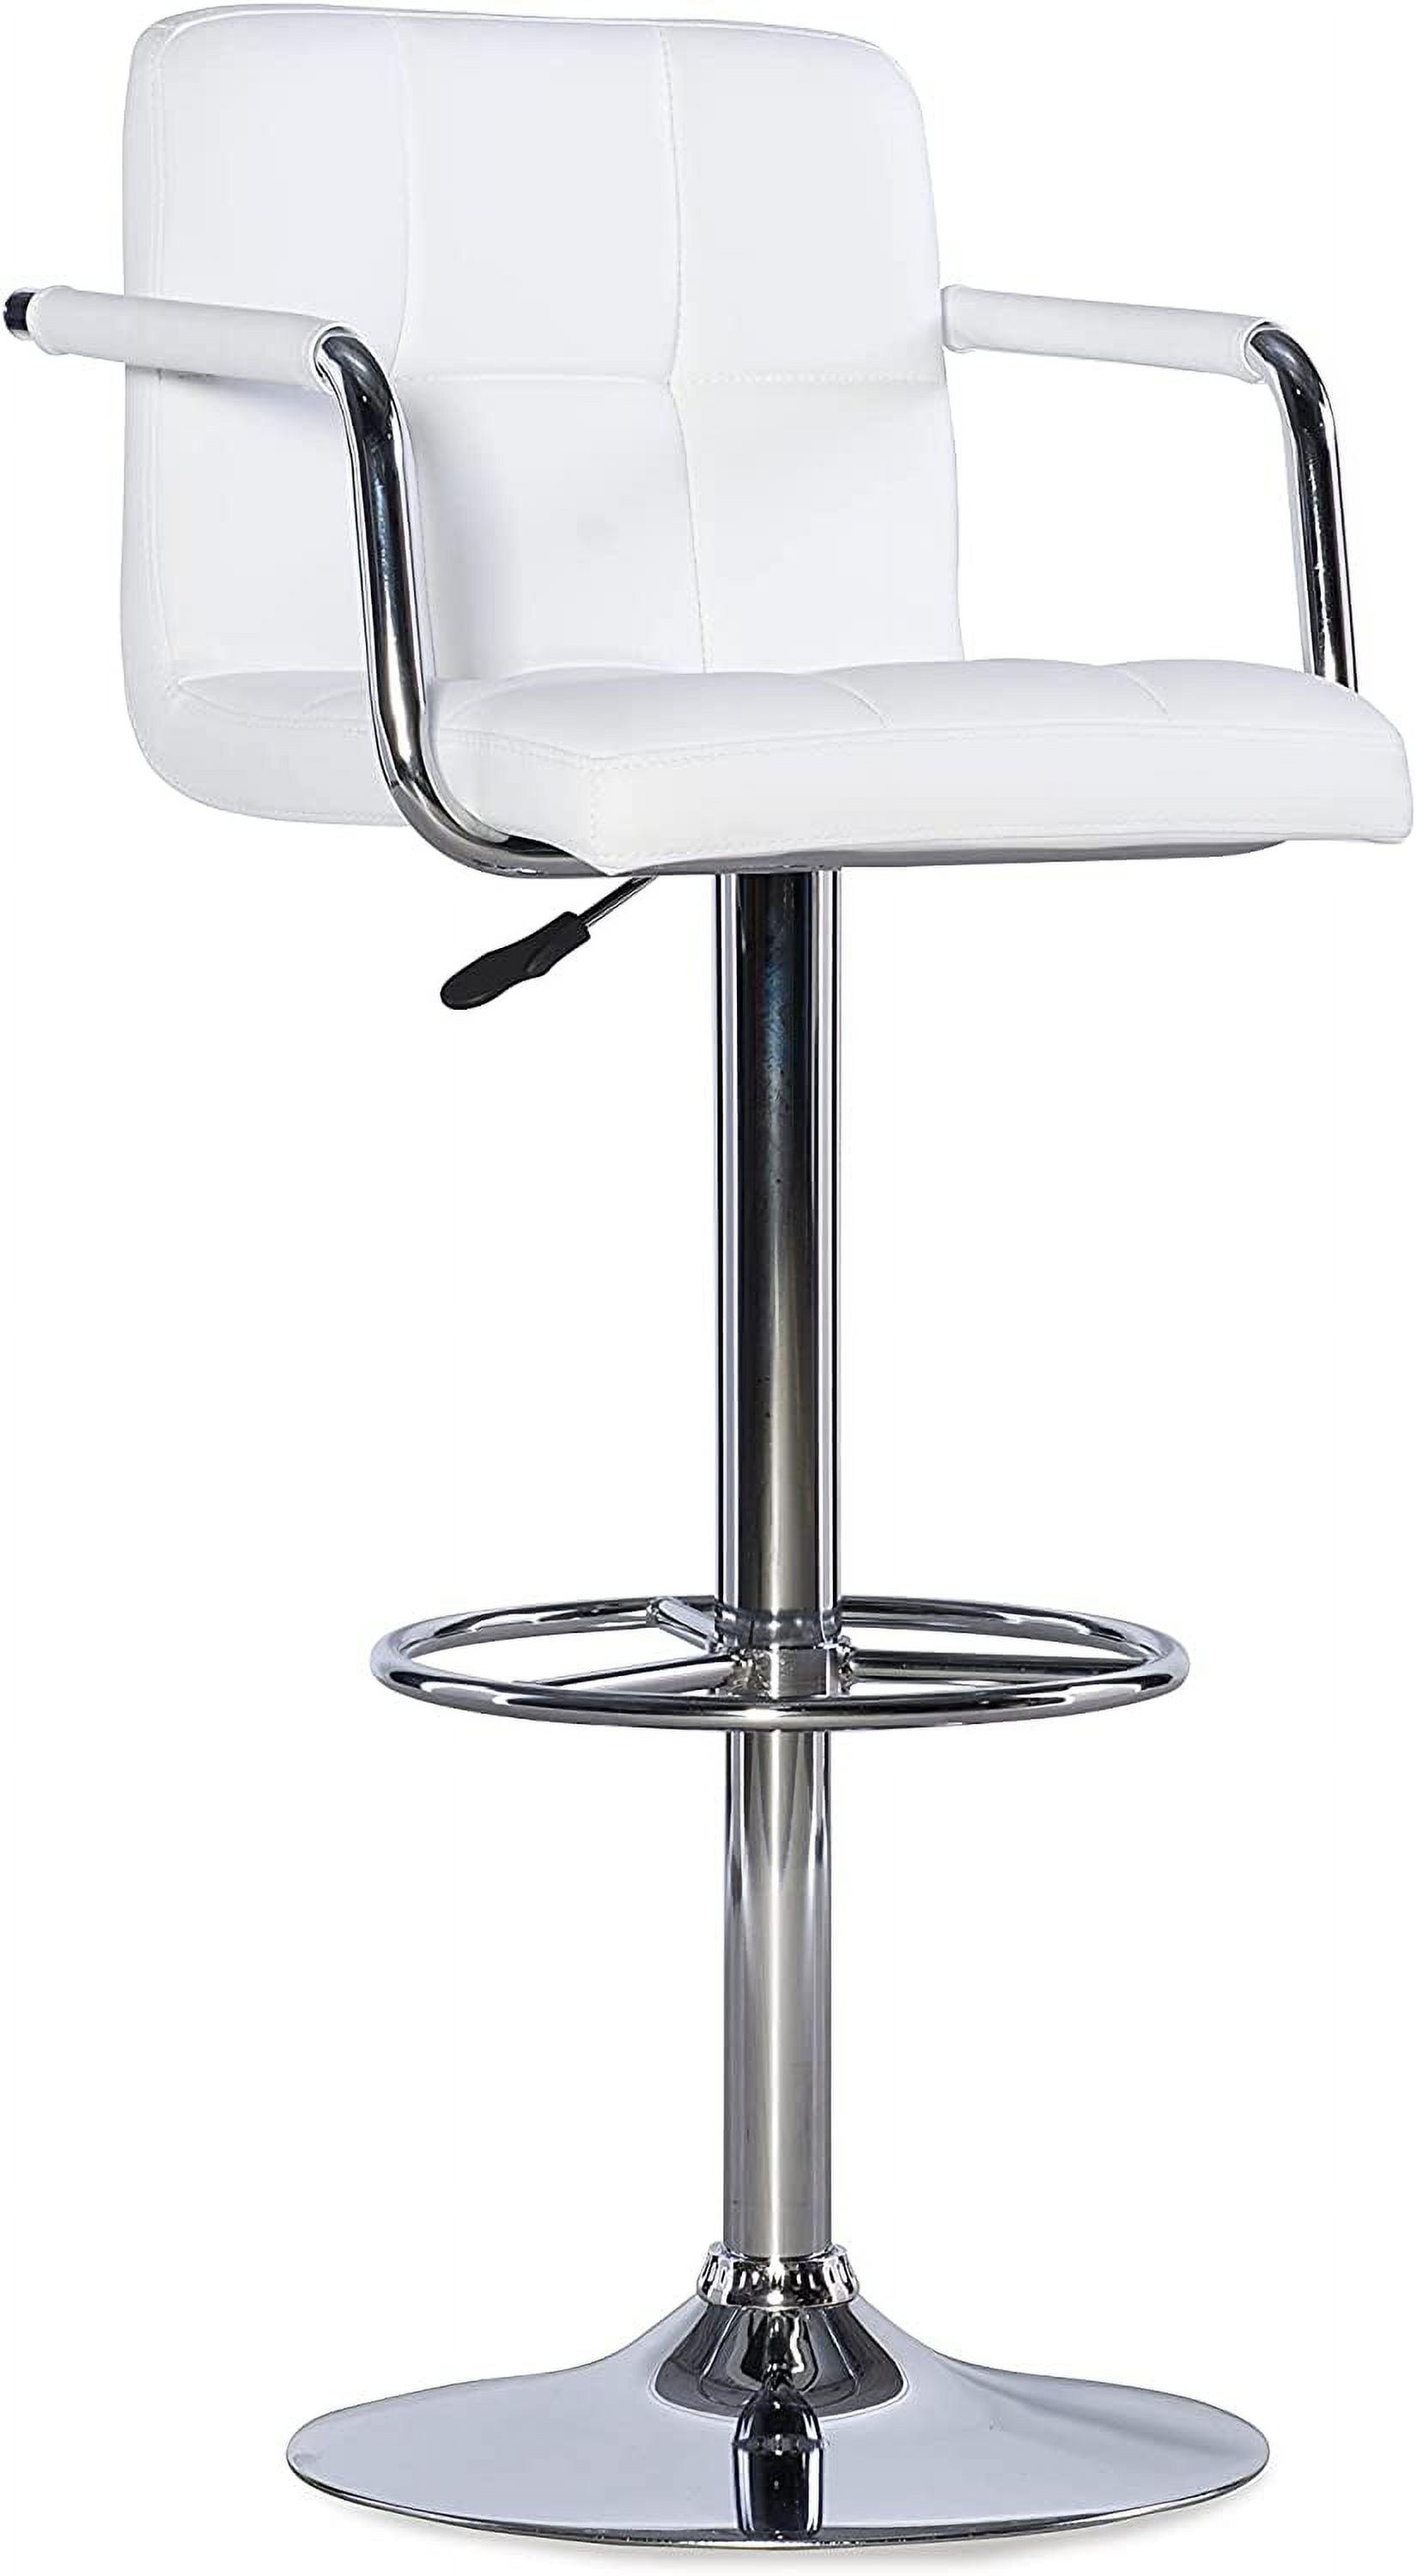 Boyd Adjustable White Faux Leather Swivel Bar Stool with Chrome Metal Base